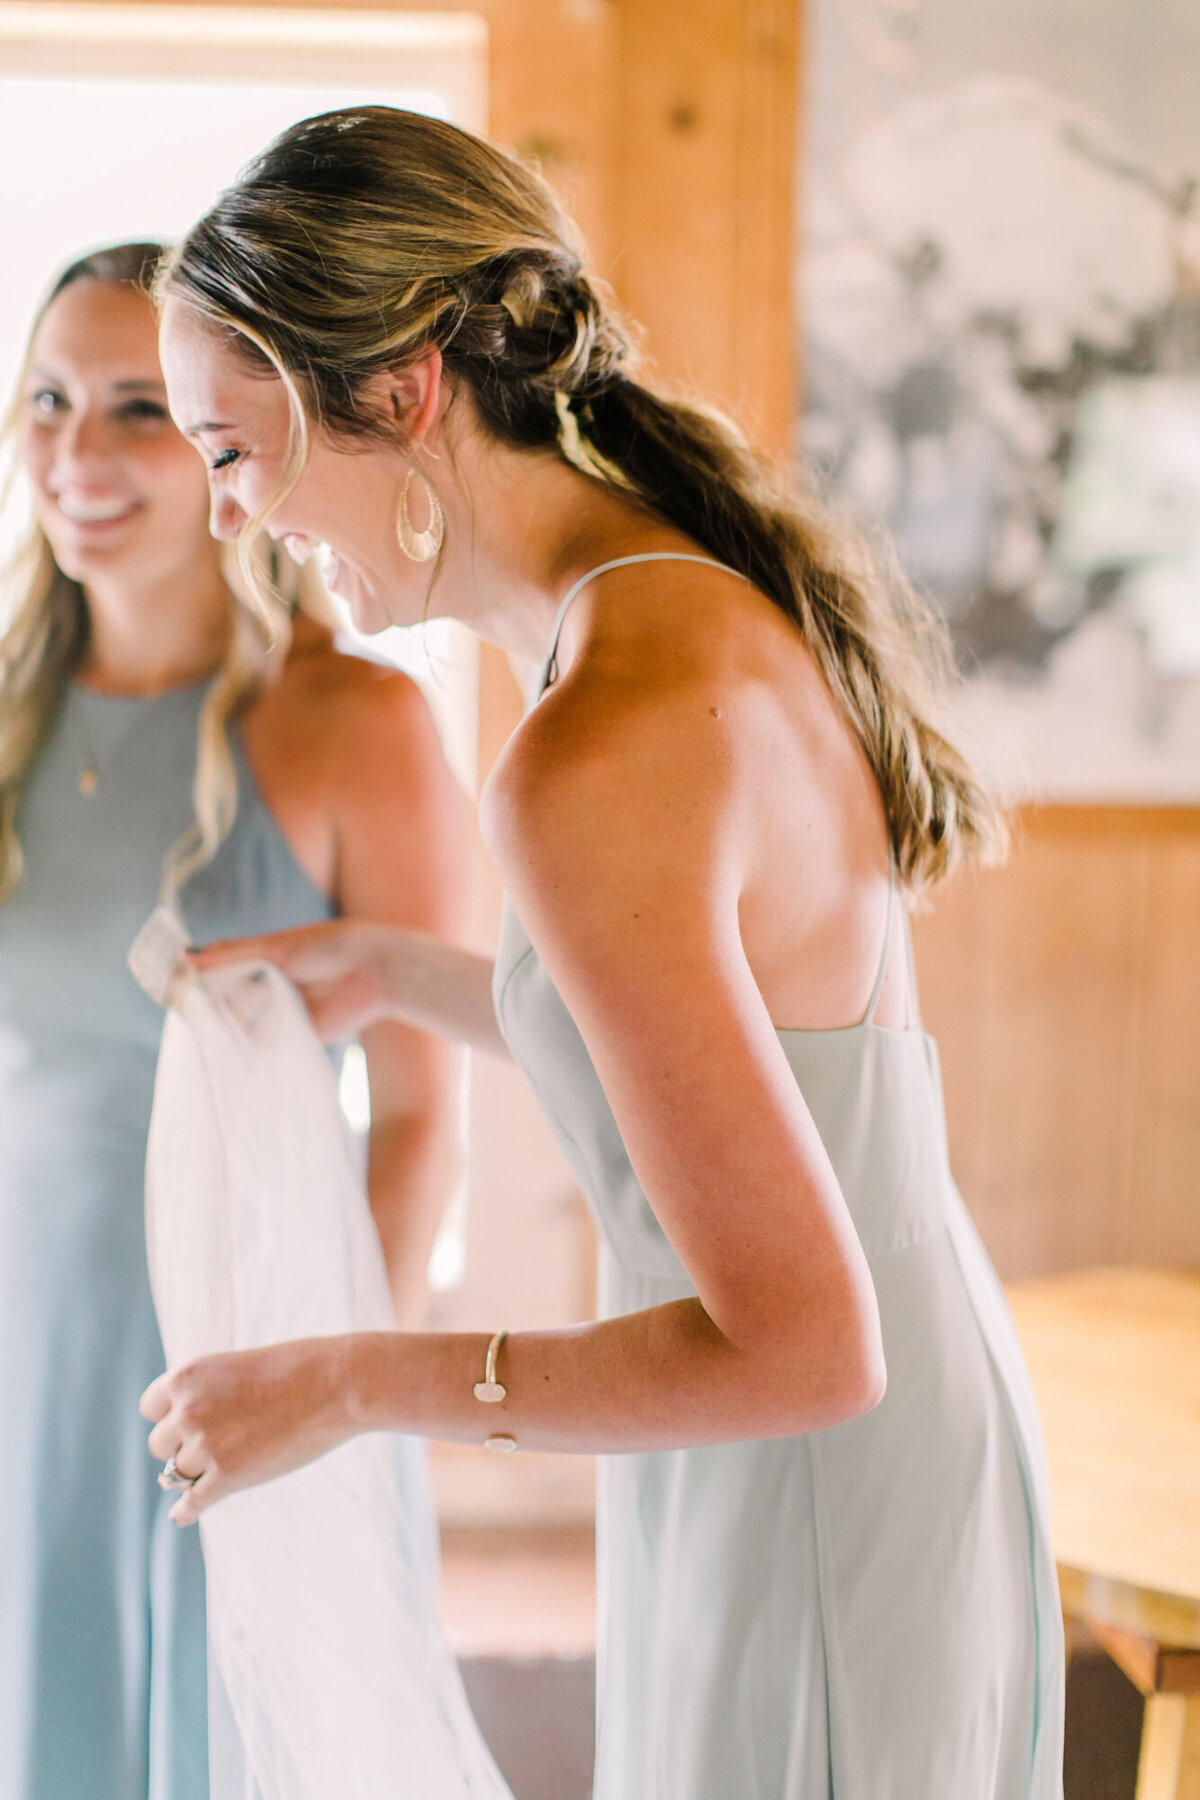 A candid moment between sisters on a wedding day